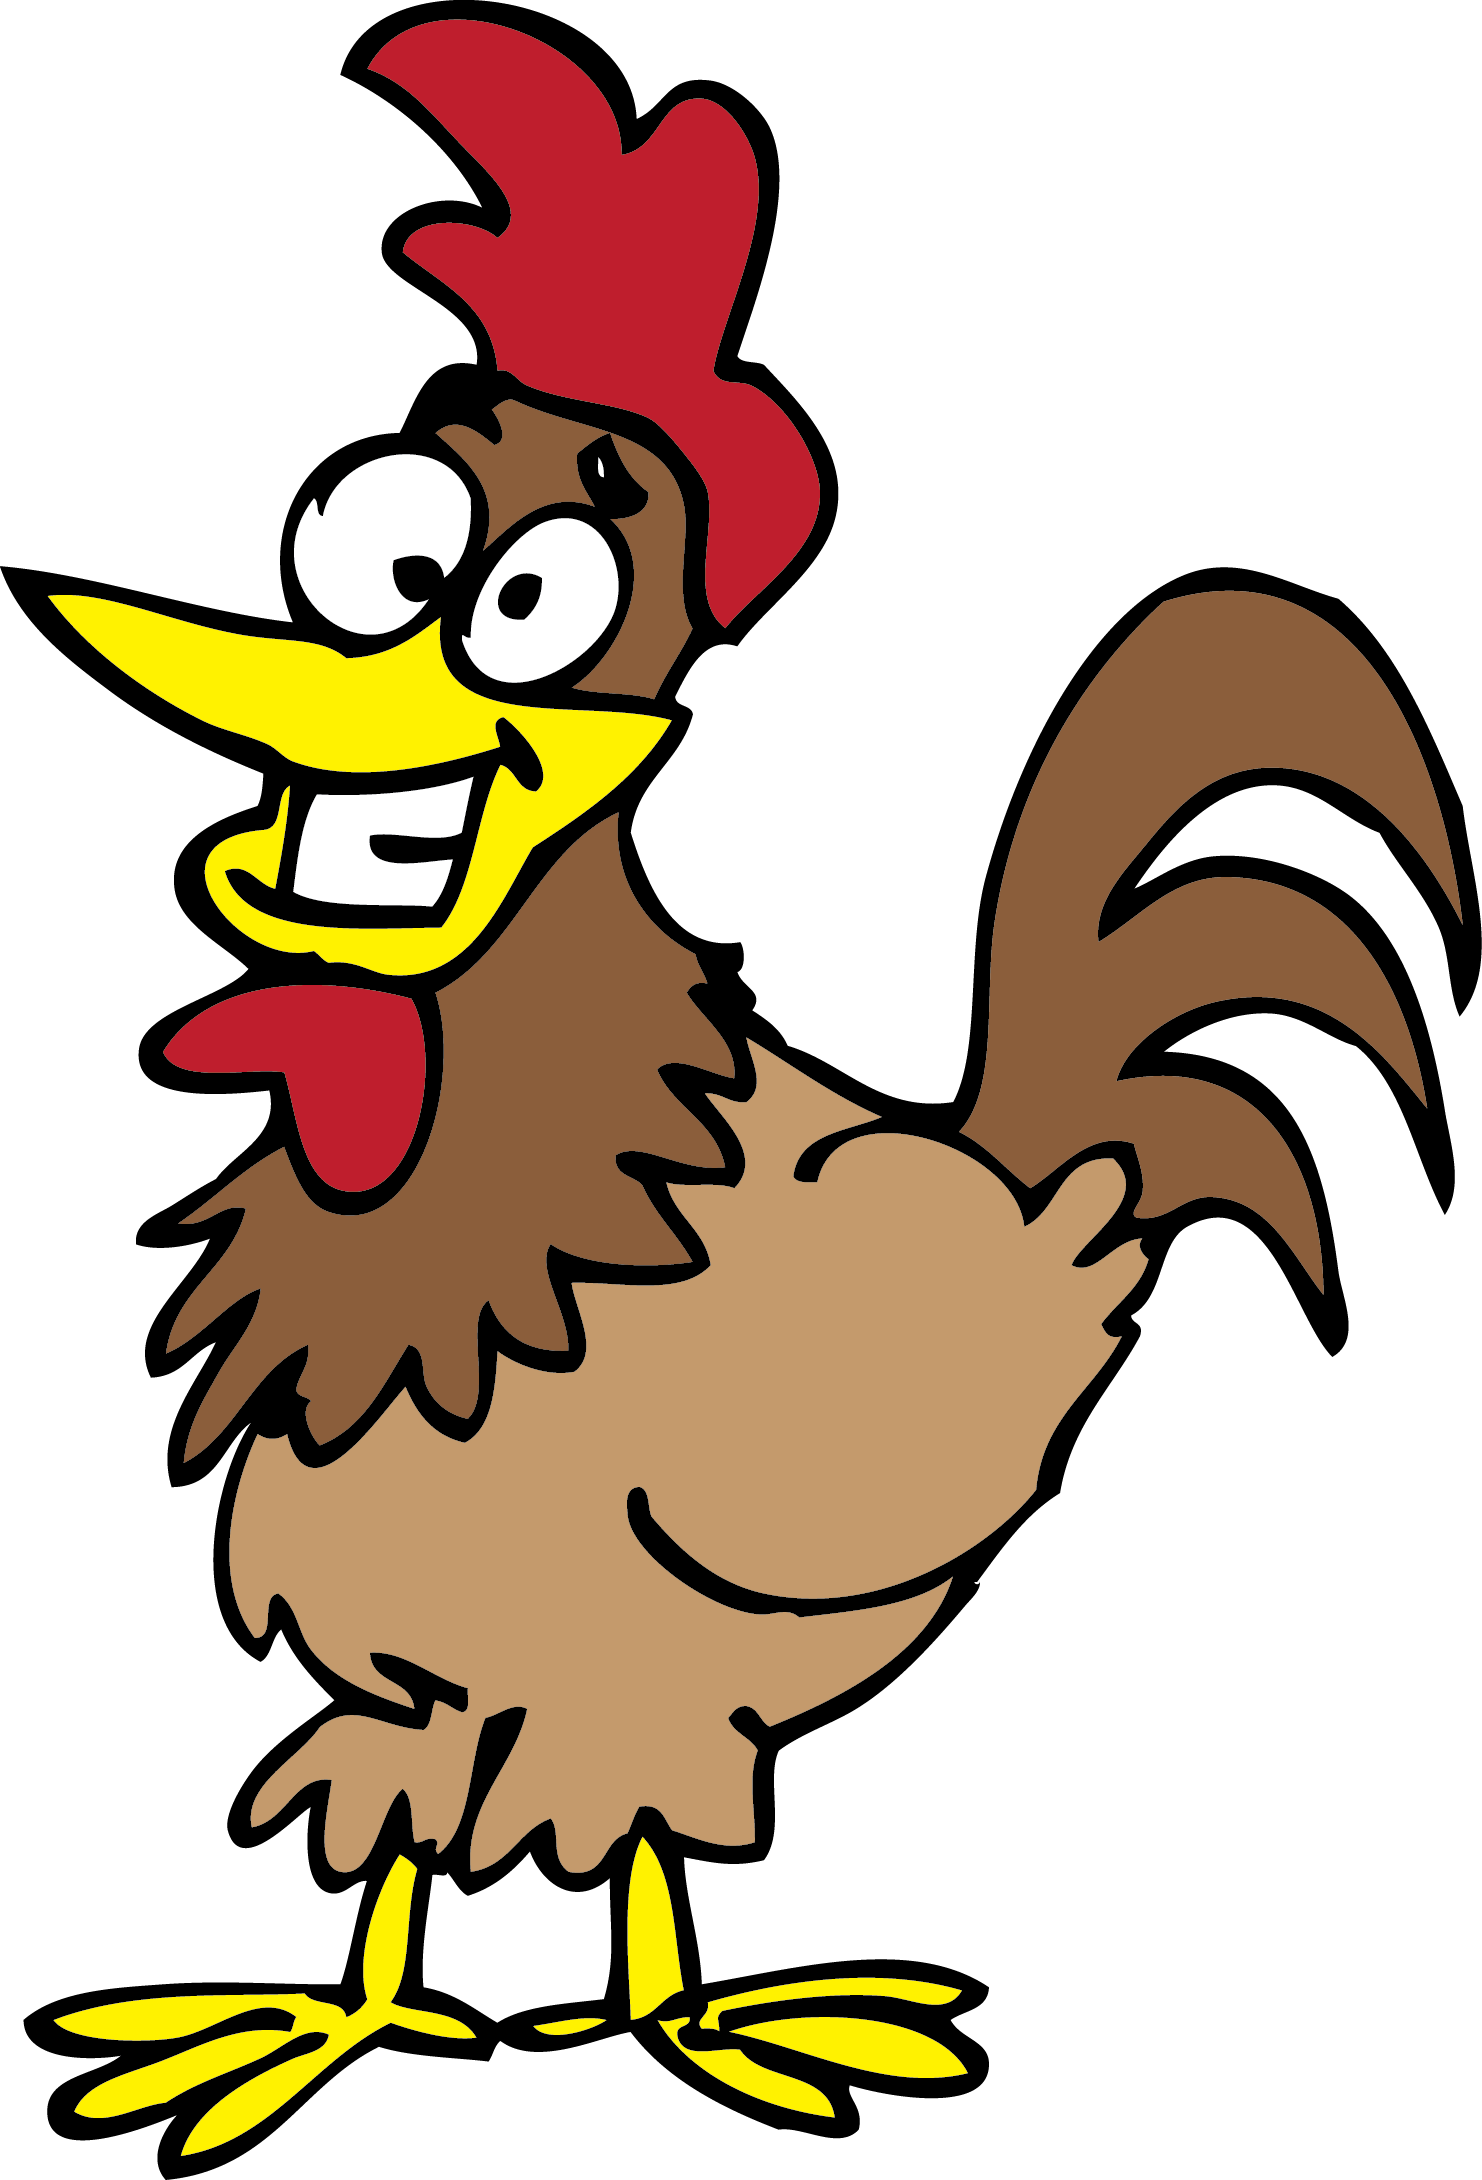 Hen clipart animation, Hen animation Transparent FREE for download on